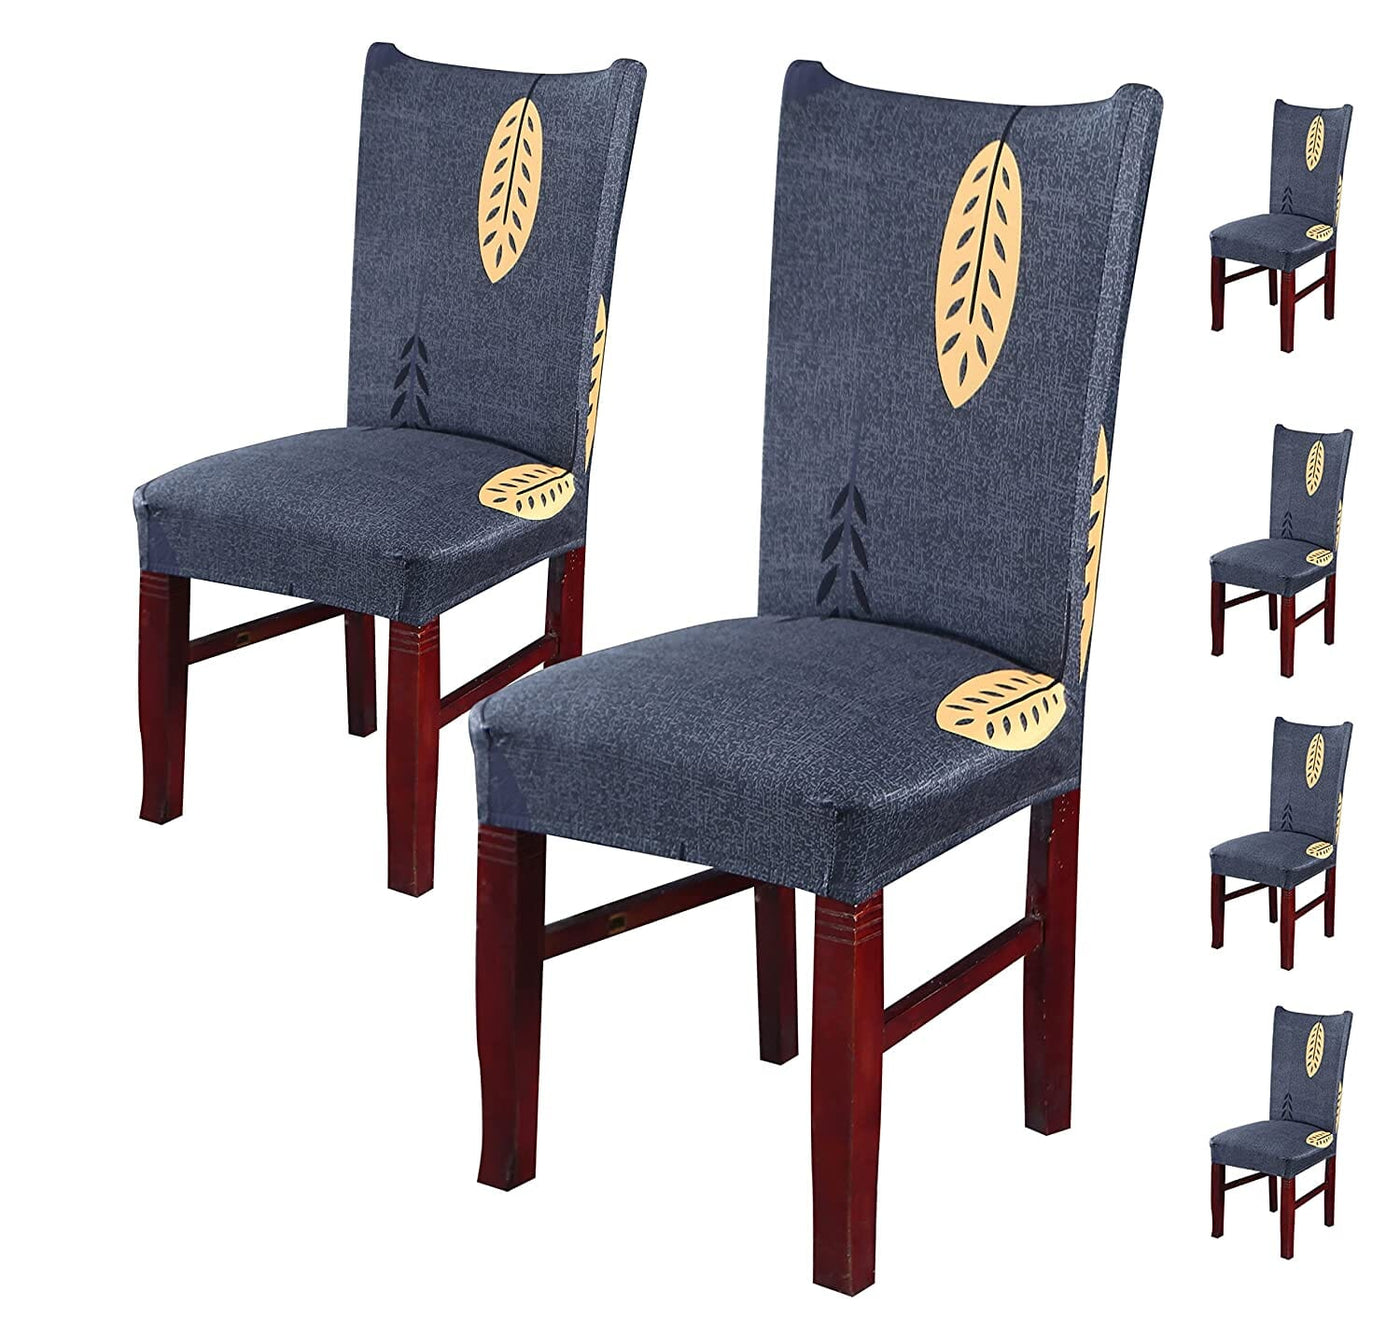 Mustard Leaf Petals Premium Chair Cover - Stretchable & Elastic Fitted Great Happy IN 